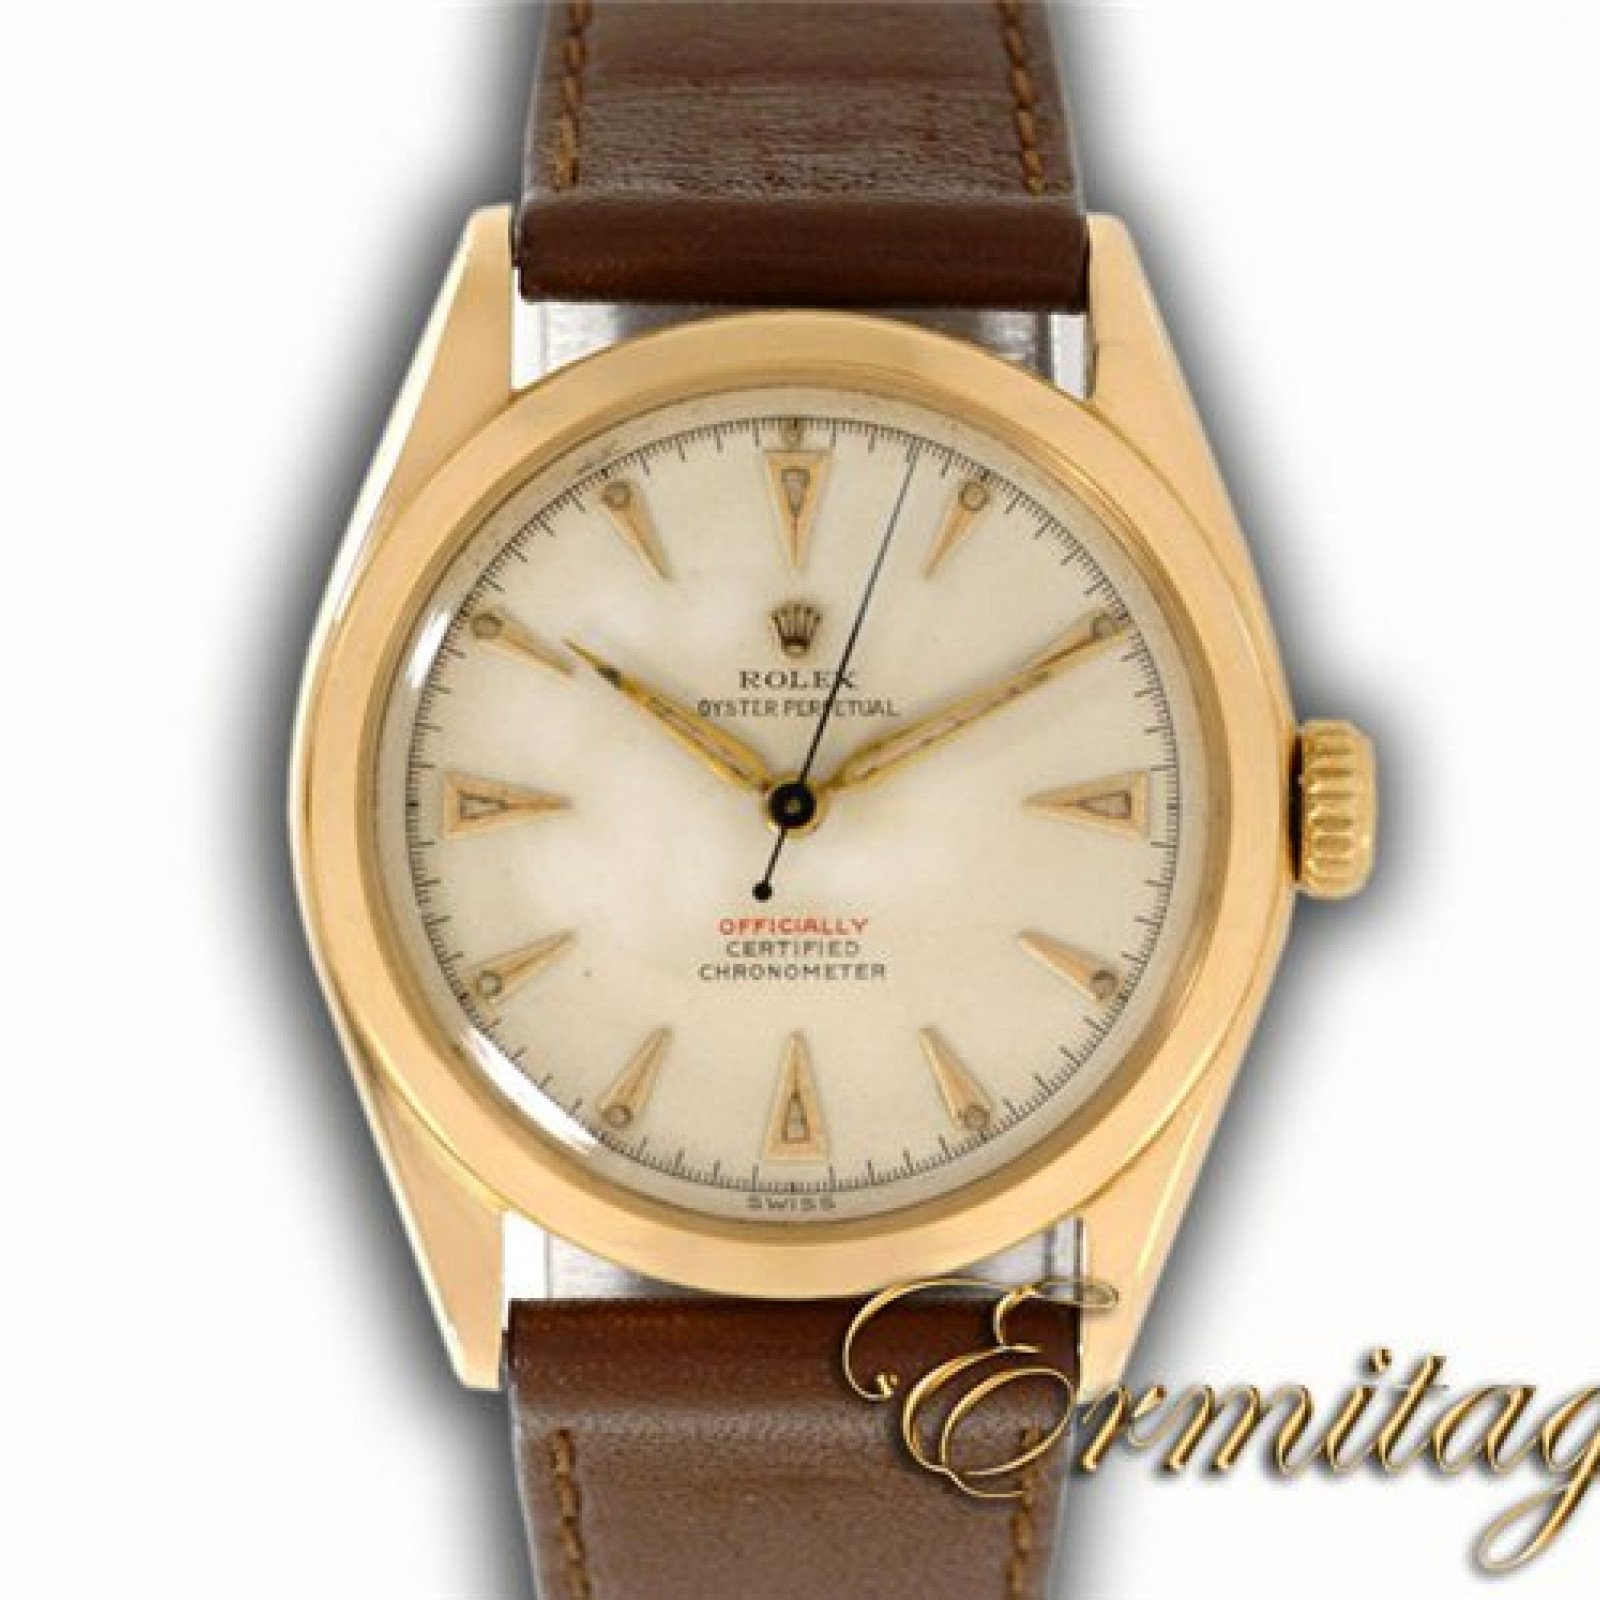 Vintage Rolex Oyster Perpetual Bubbleback 6084